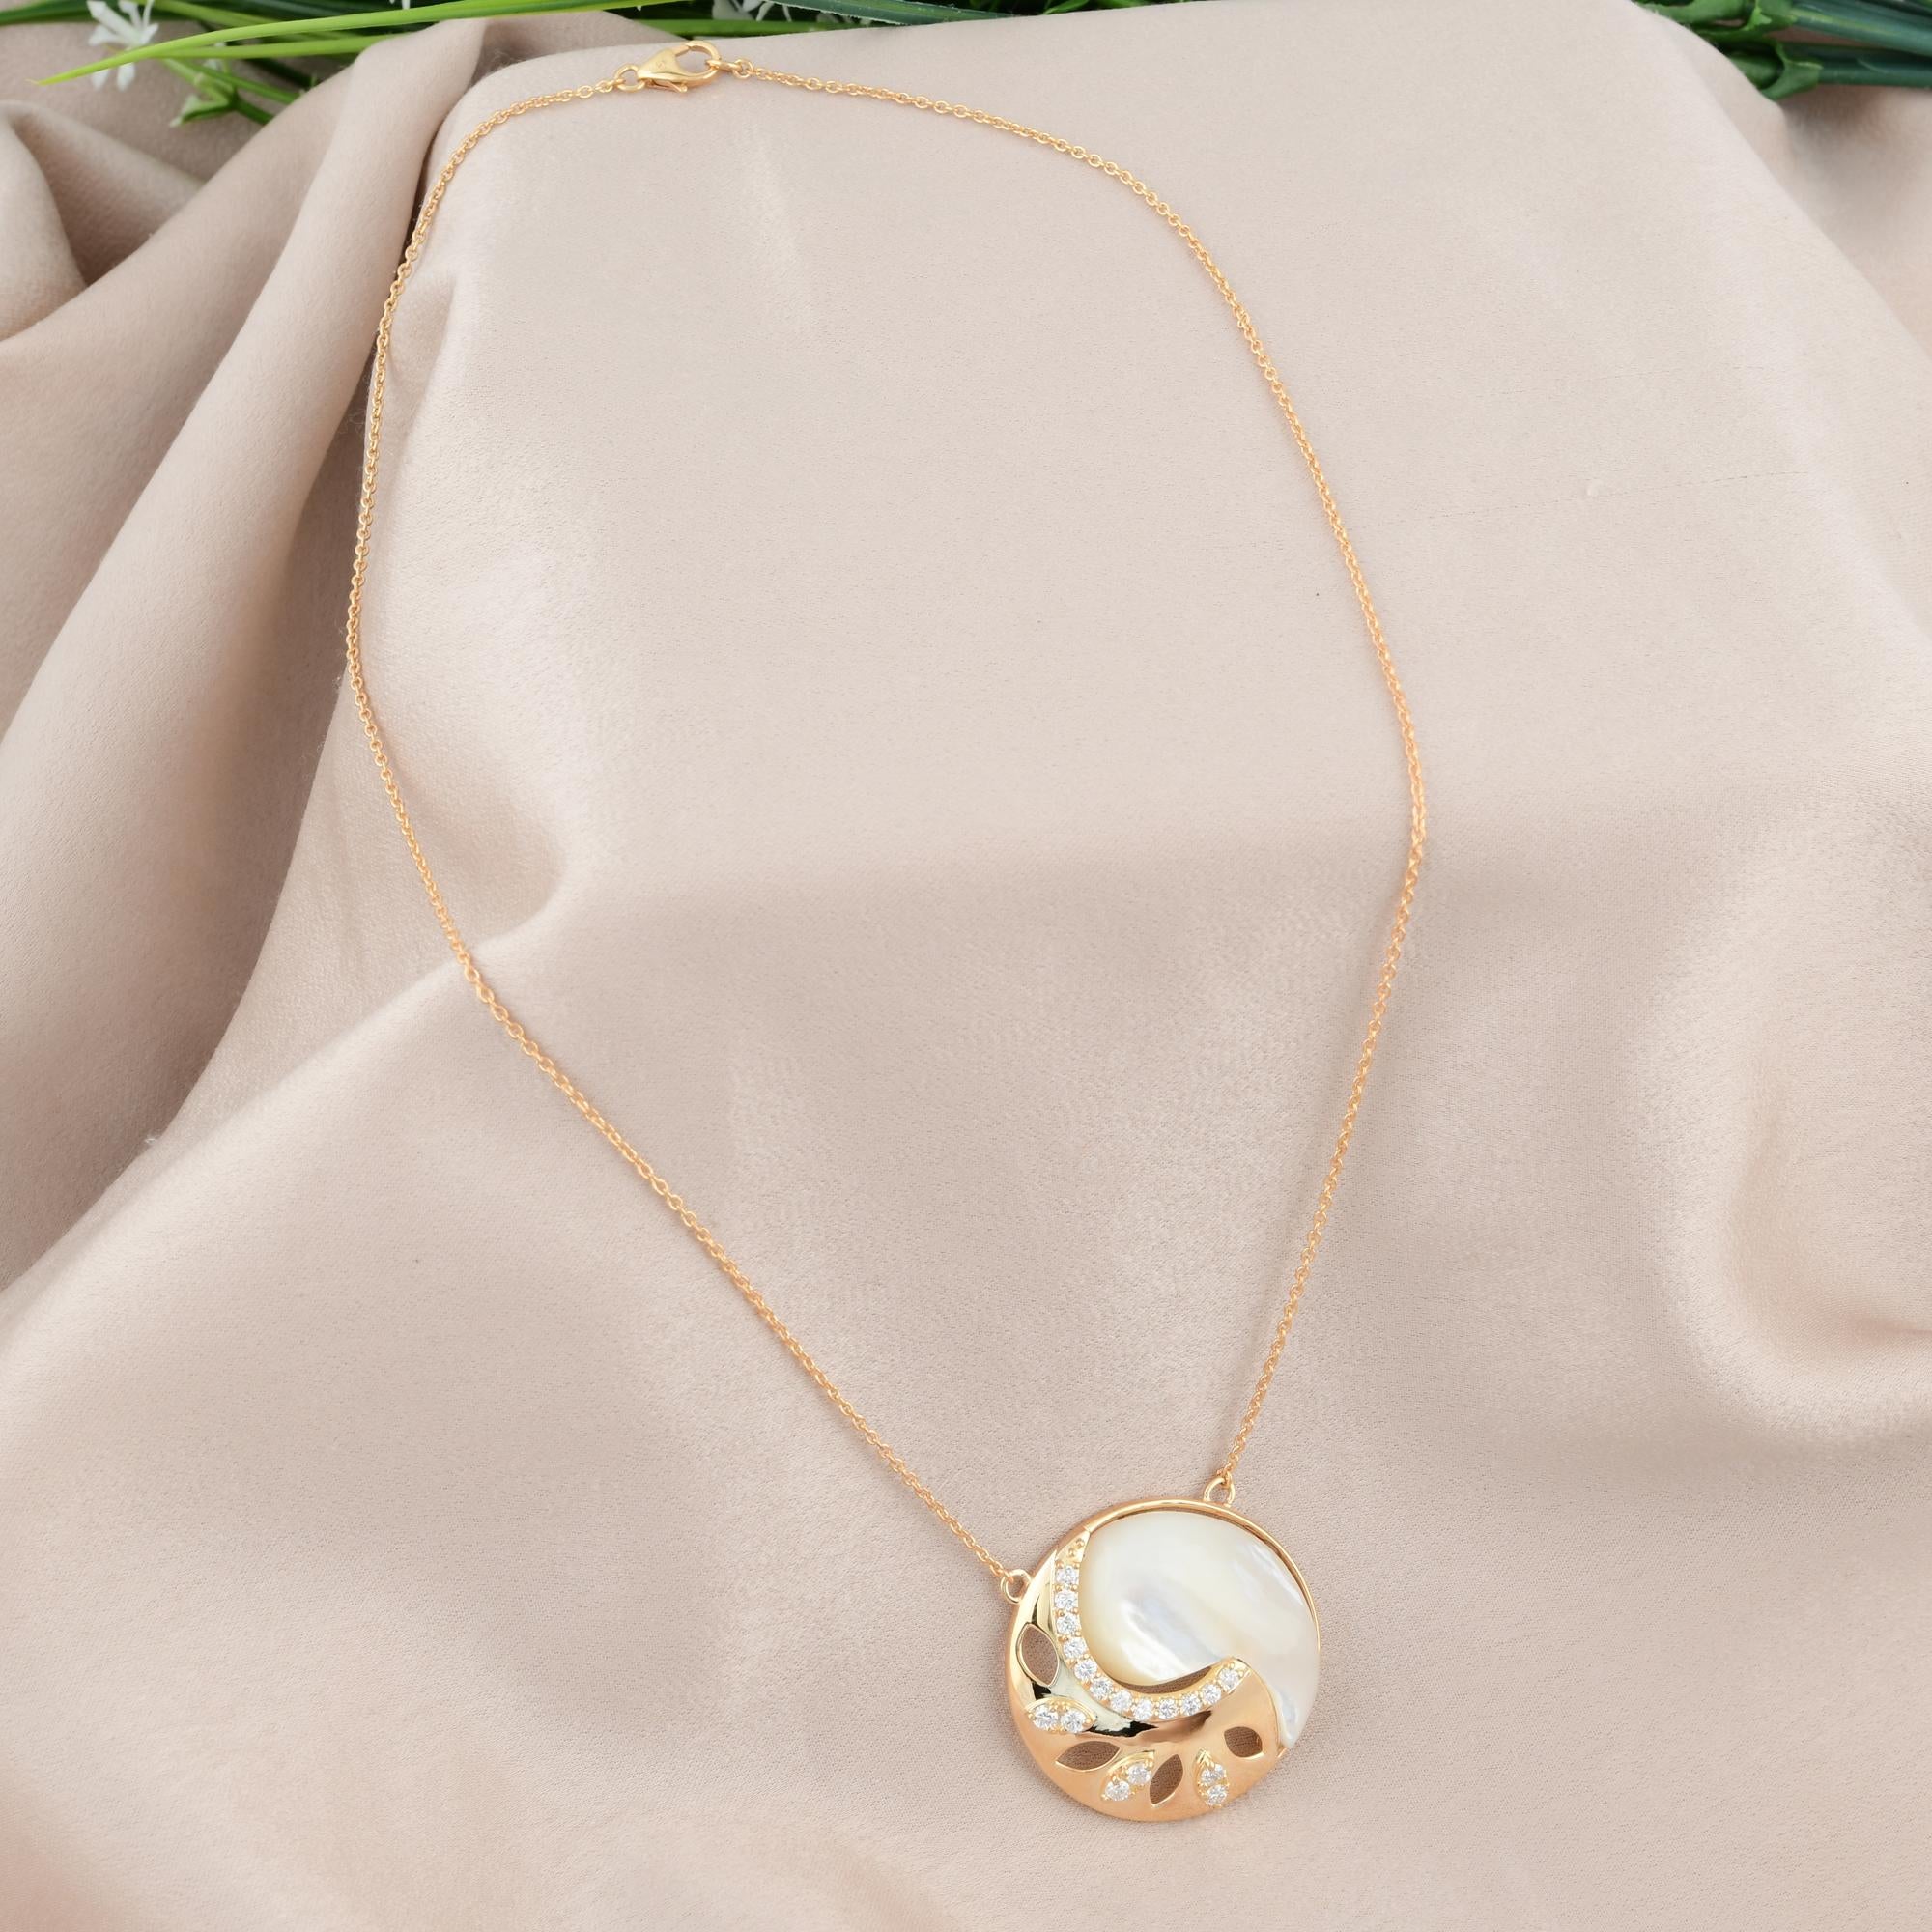 Women's Mother Of Pearl Gemstone Charm Necklace 14k Yellow Gold Diamond Handmade Jewelry For Sale